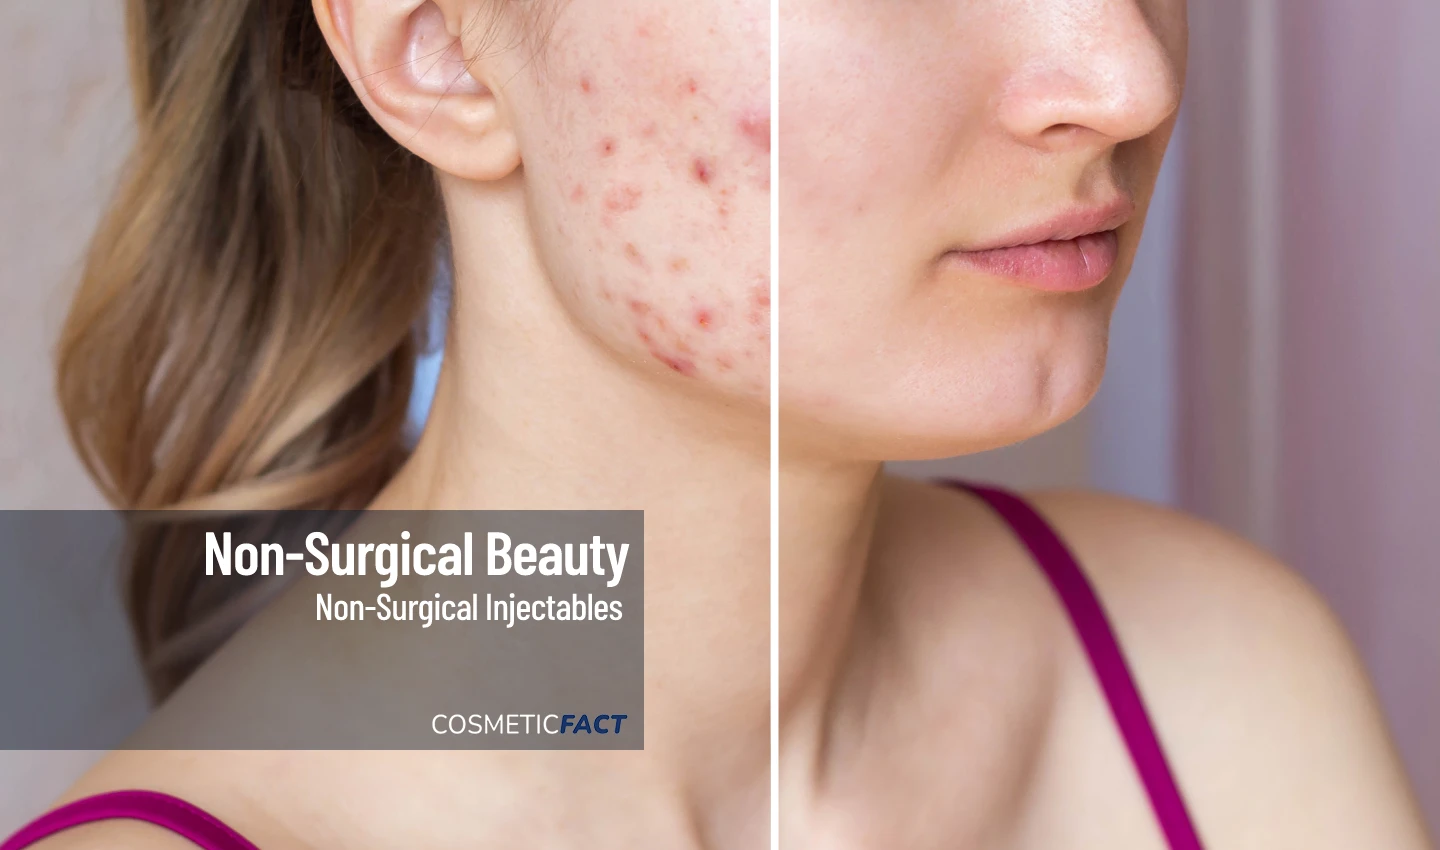 Before-and-after image of a woman's face, with one side displaying severe acne scarring and the other appearing smooth and clear after receiving dermal filler treatment for acne scarring.